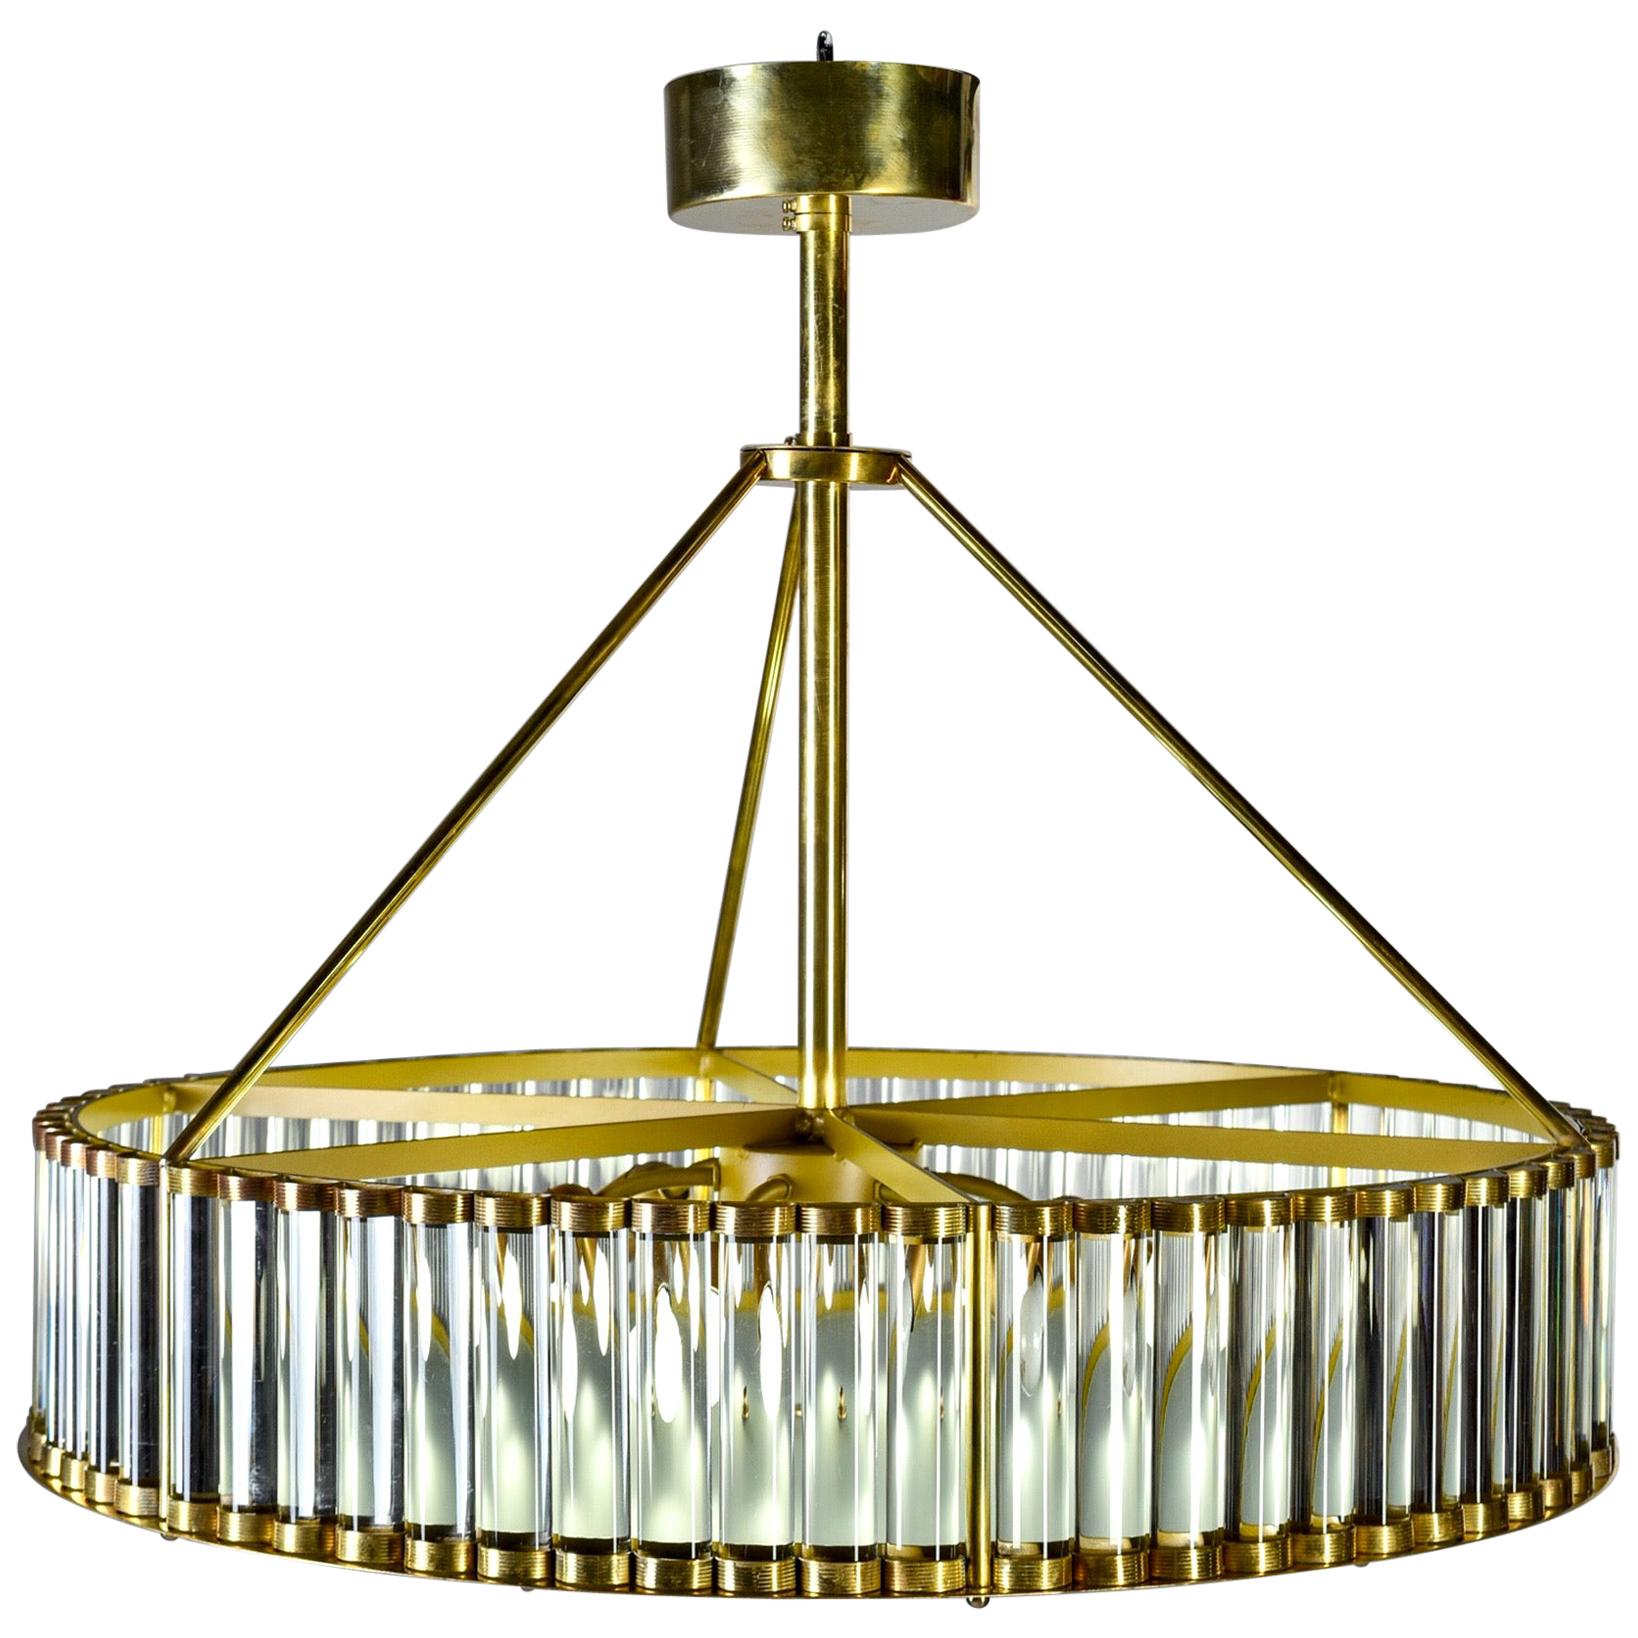 Italian Deco Style Fixture with Polished Brass and Glass Rod Frame